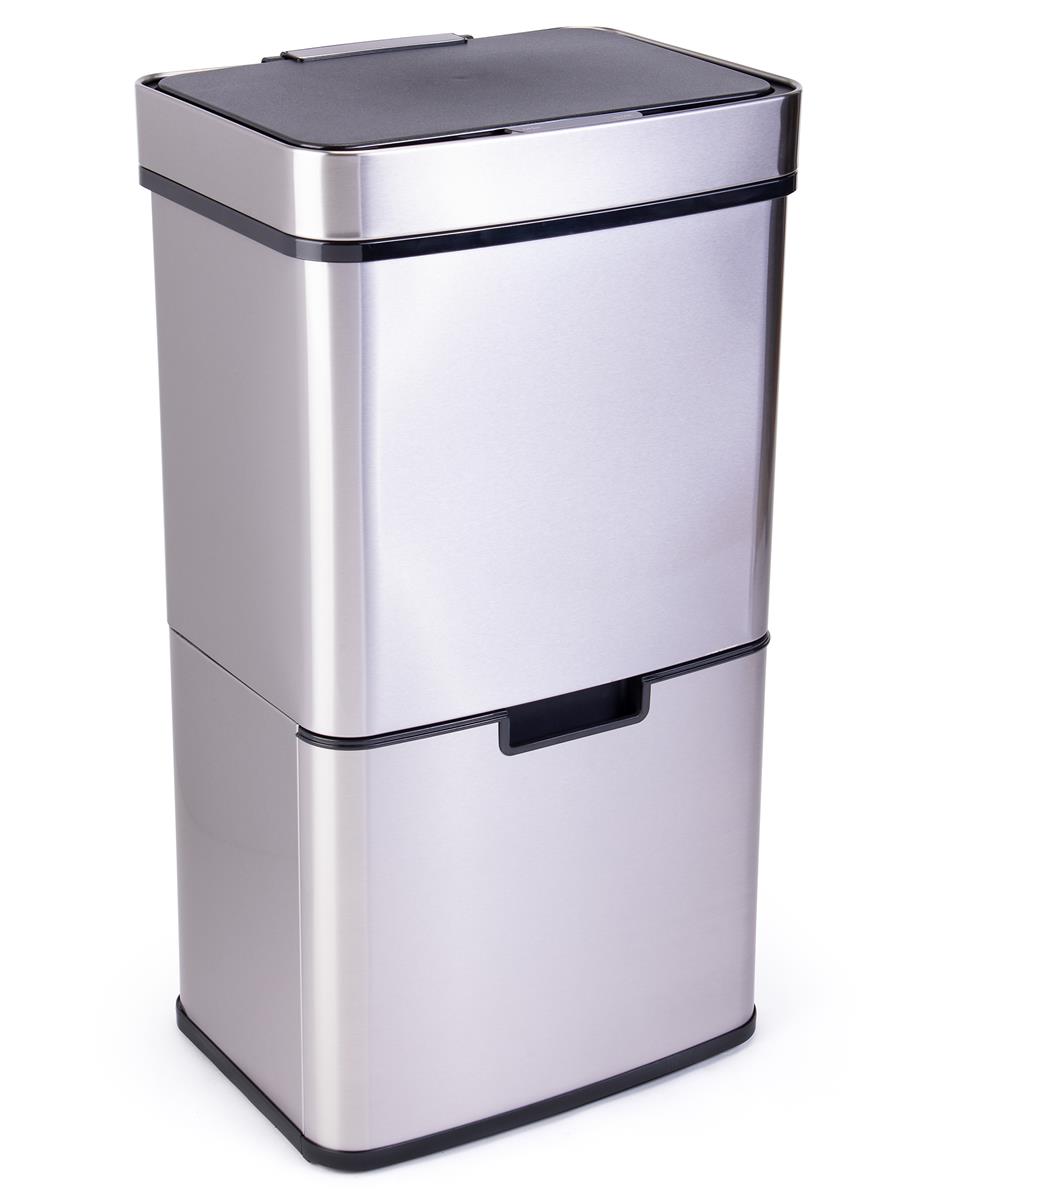 2-in-1 Multi Compartment Pedal Bin Recycle Rubbish Waste Stainless Steel